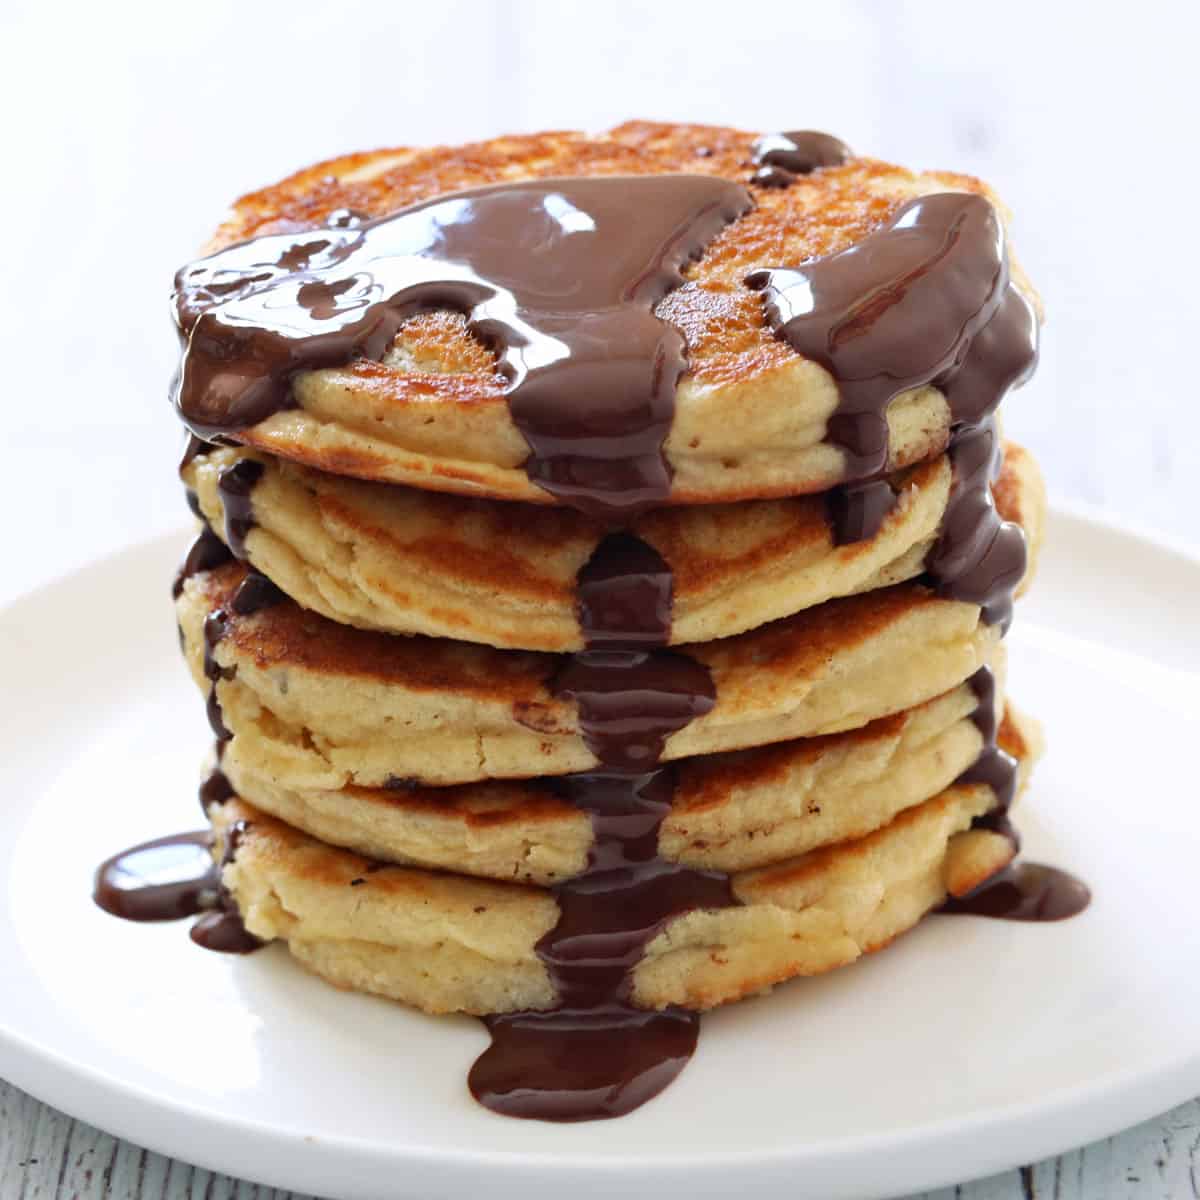 Almond flour pancakes are topped with melted chocolate.